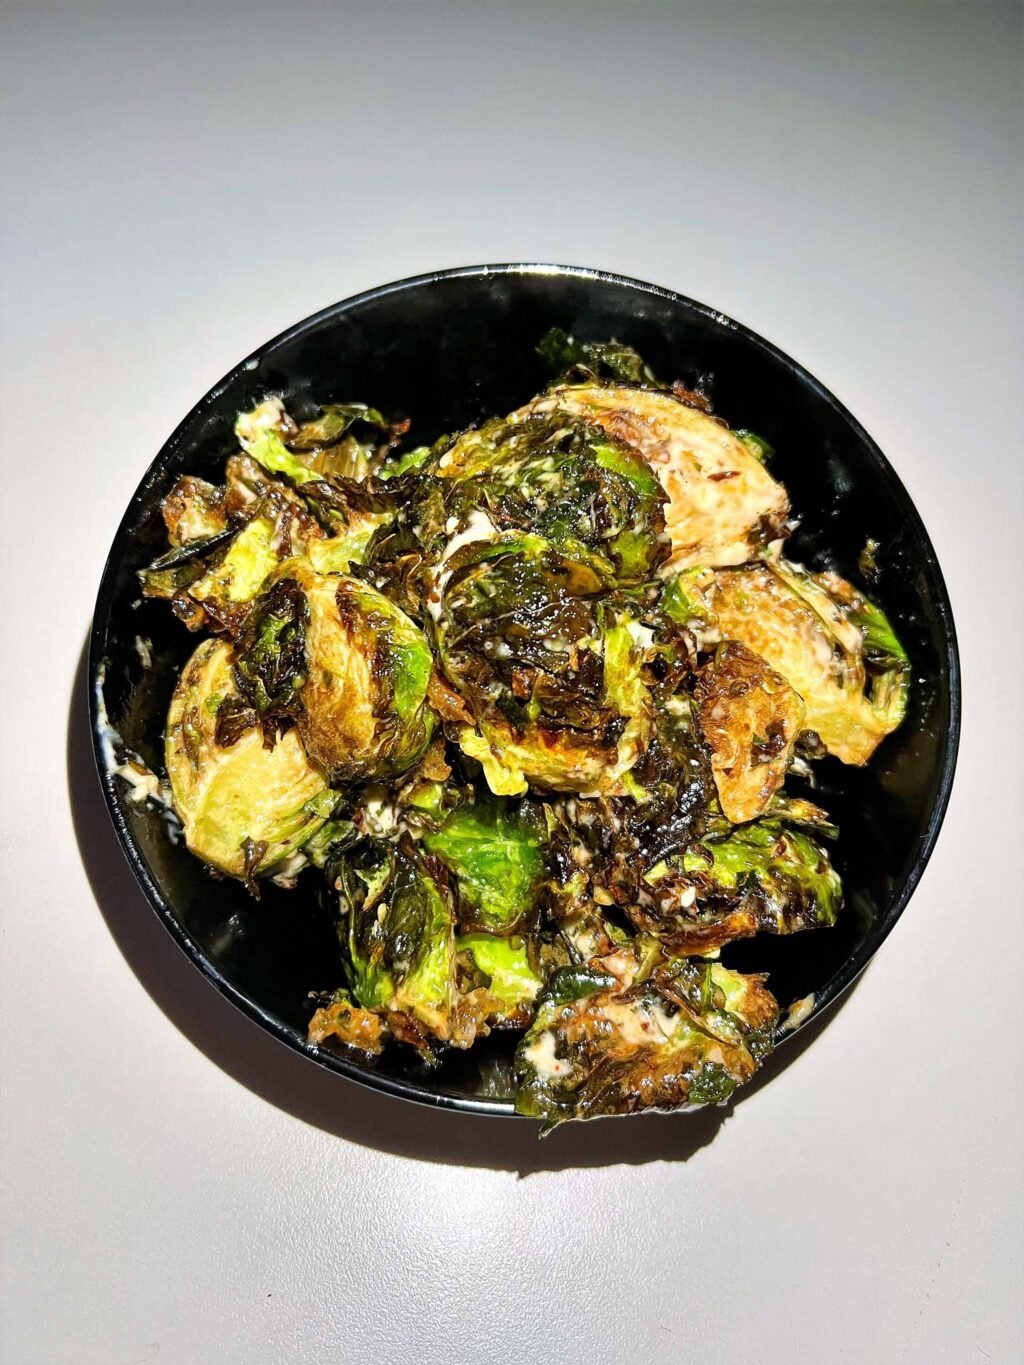 Brussel sprouts - I|O Rooftop, The Godfrey Hotel Hollywood